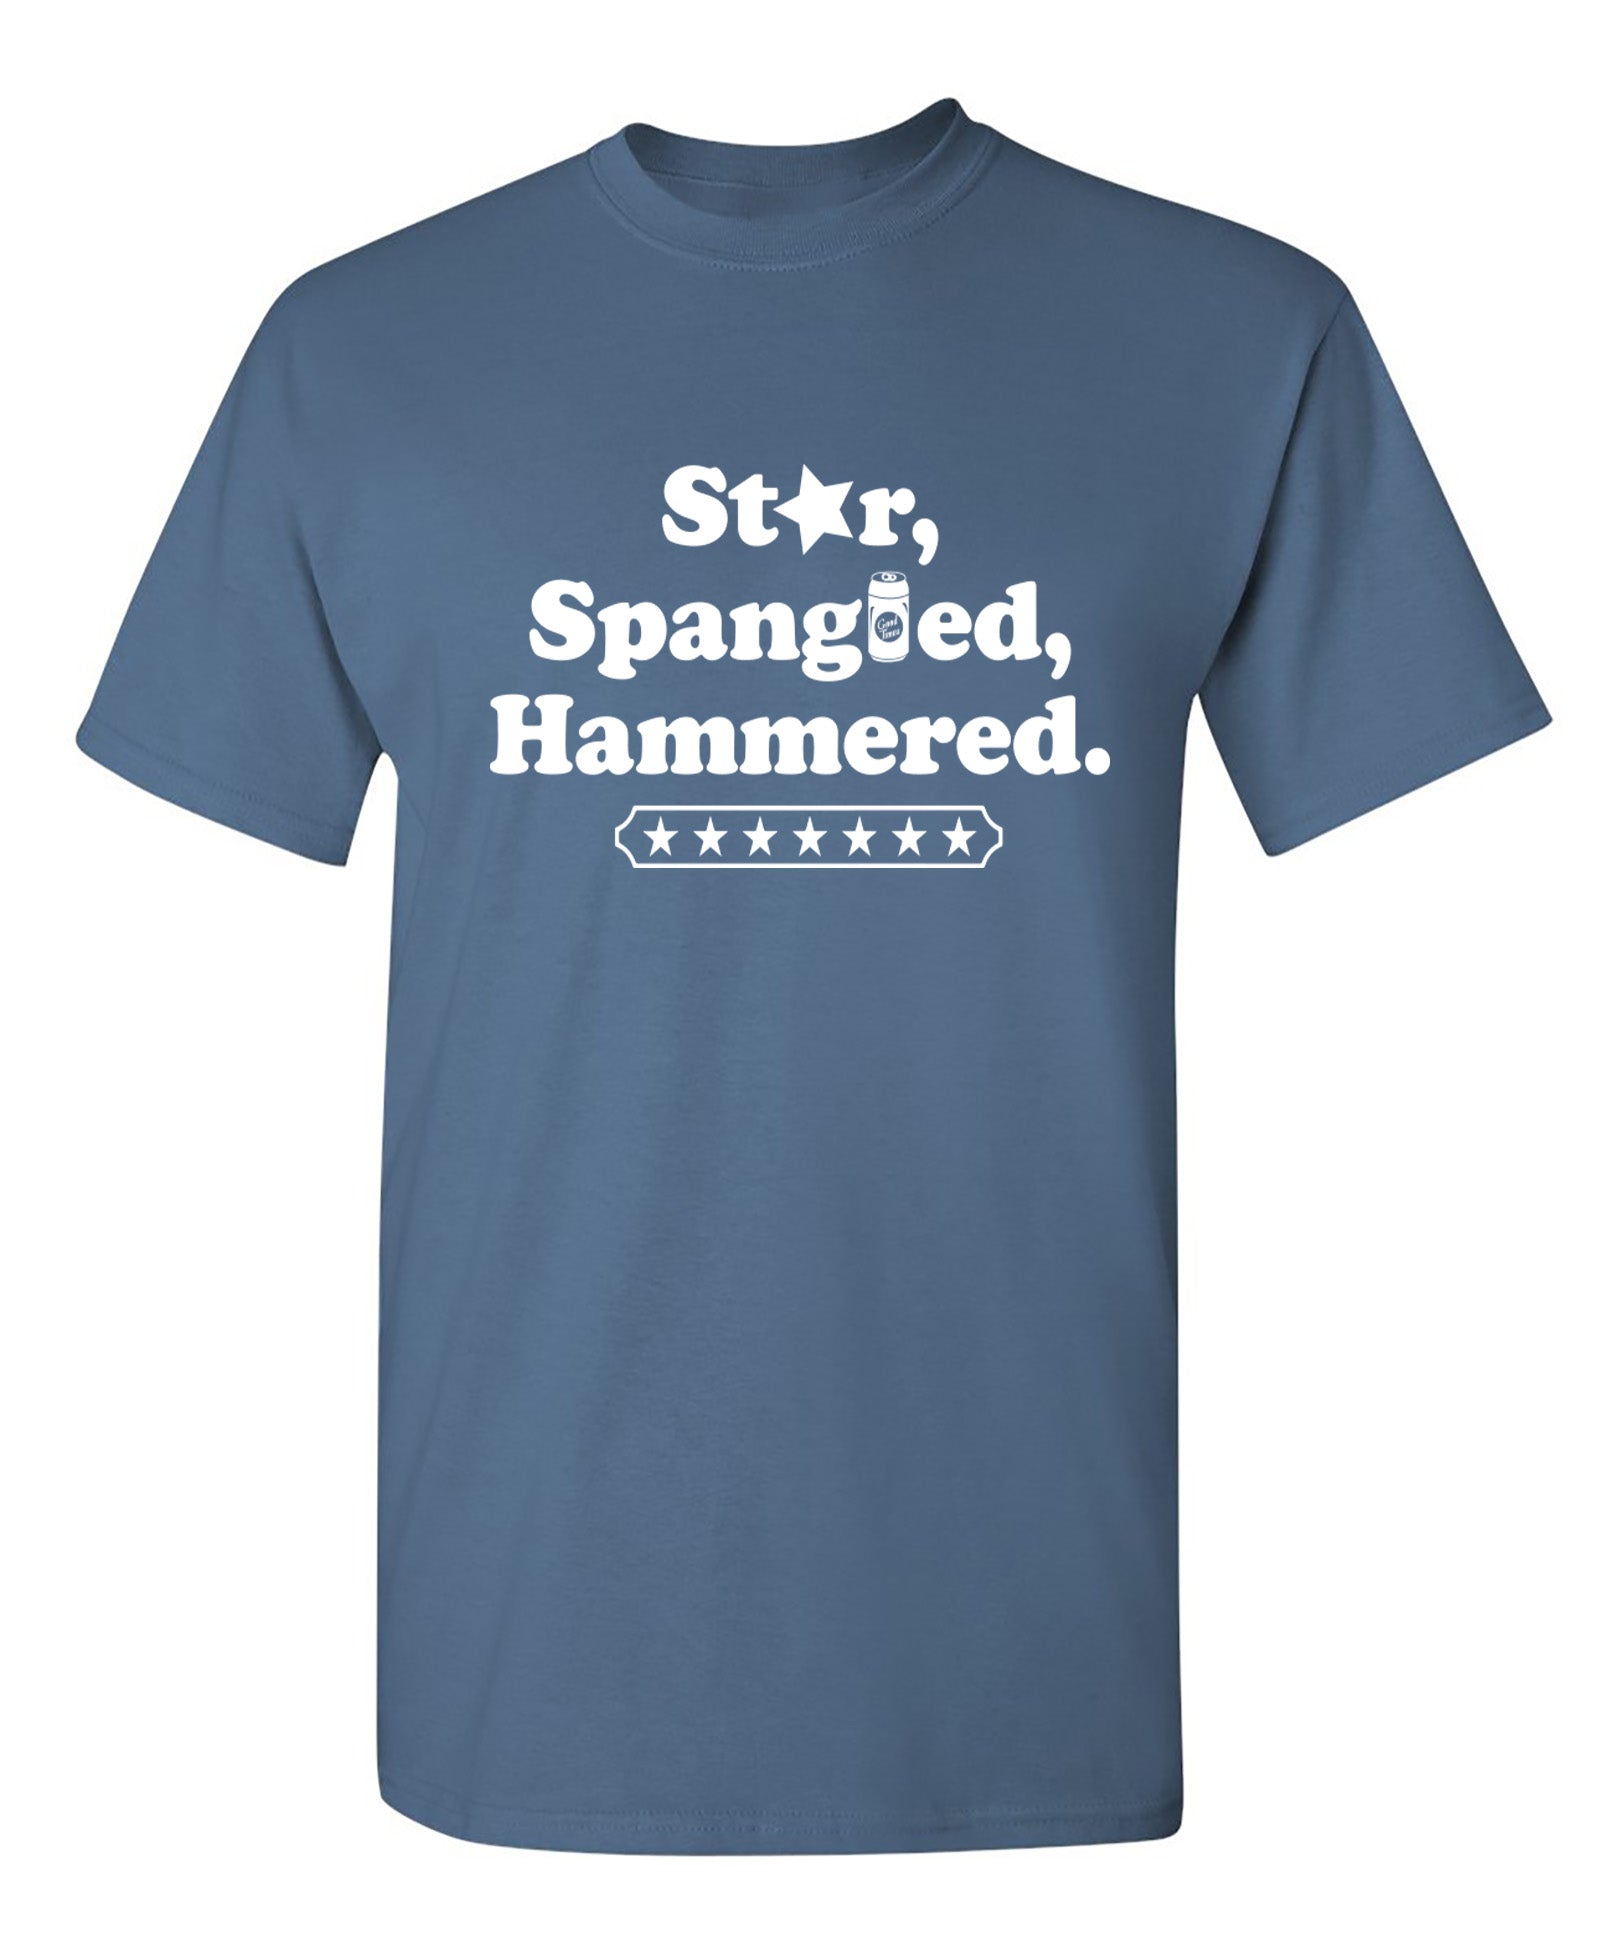 Star Spangled Hammered - Funny T Shirts & Graphic Tees